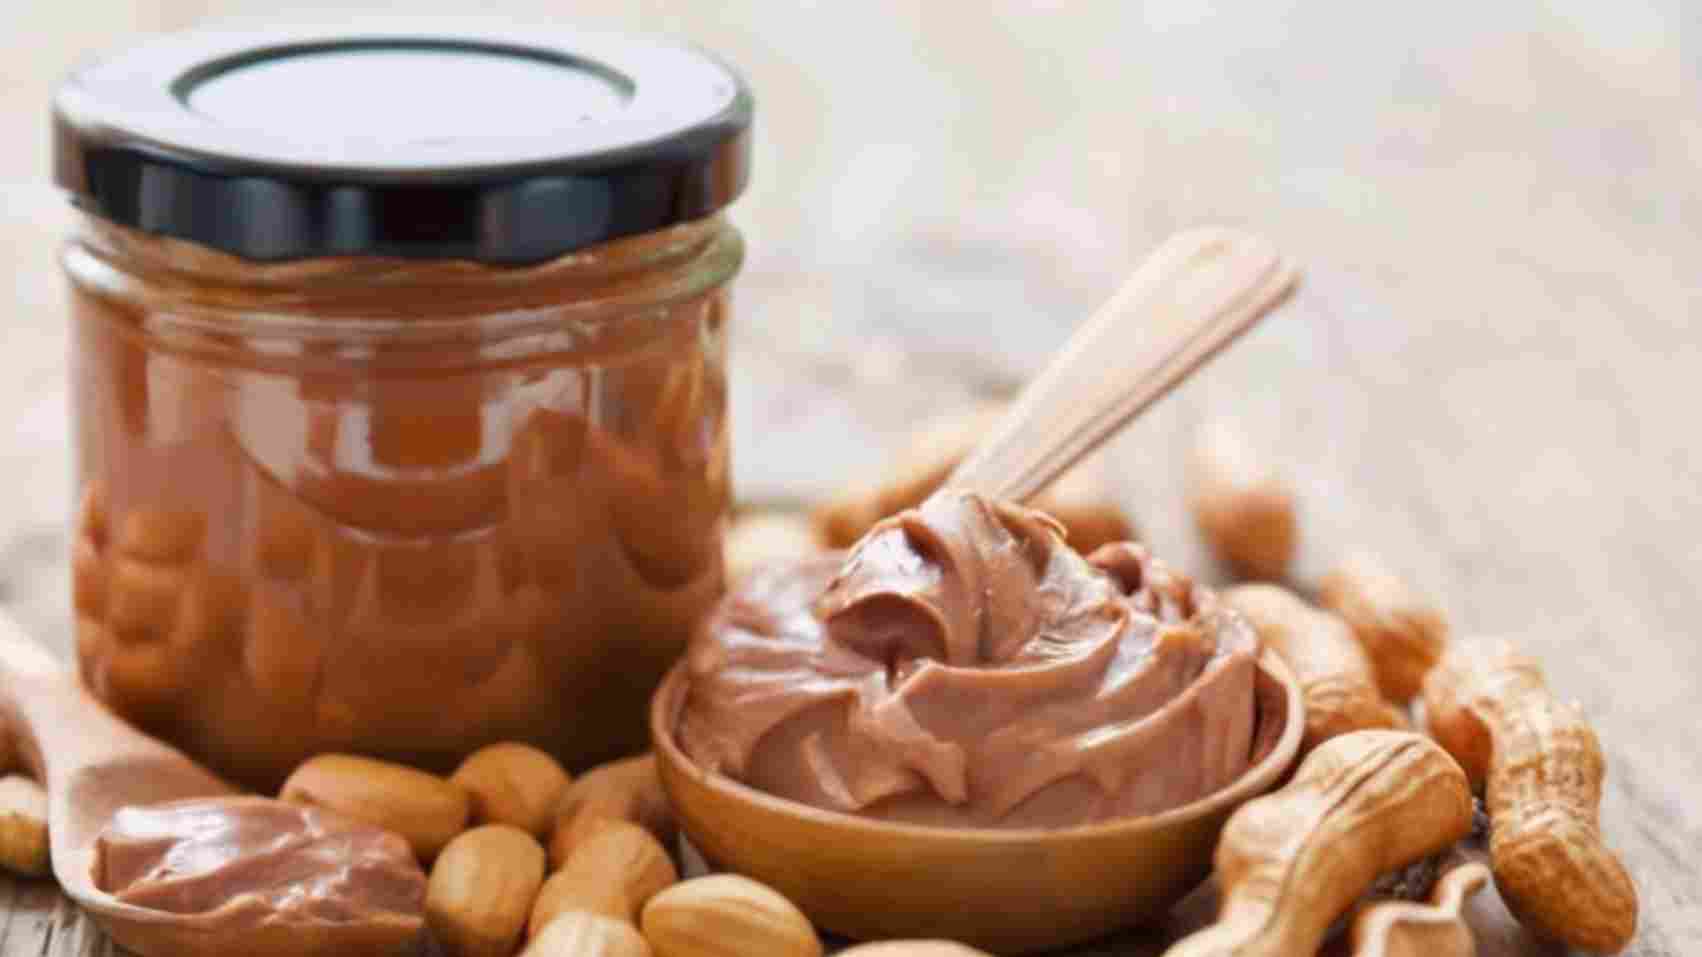 Spiritual Meaning of Smelling Peanut Butter